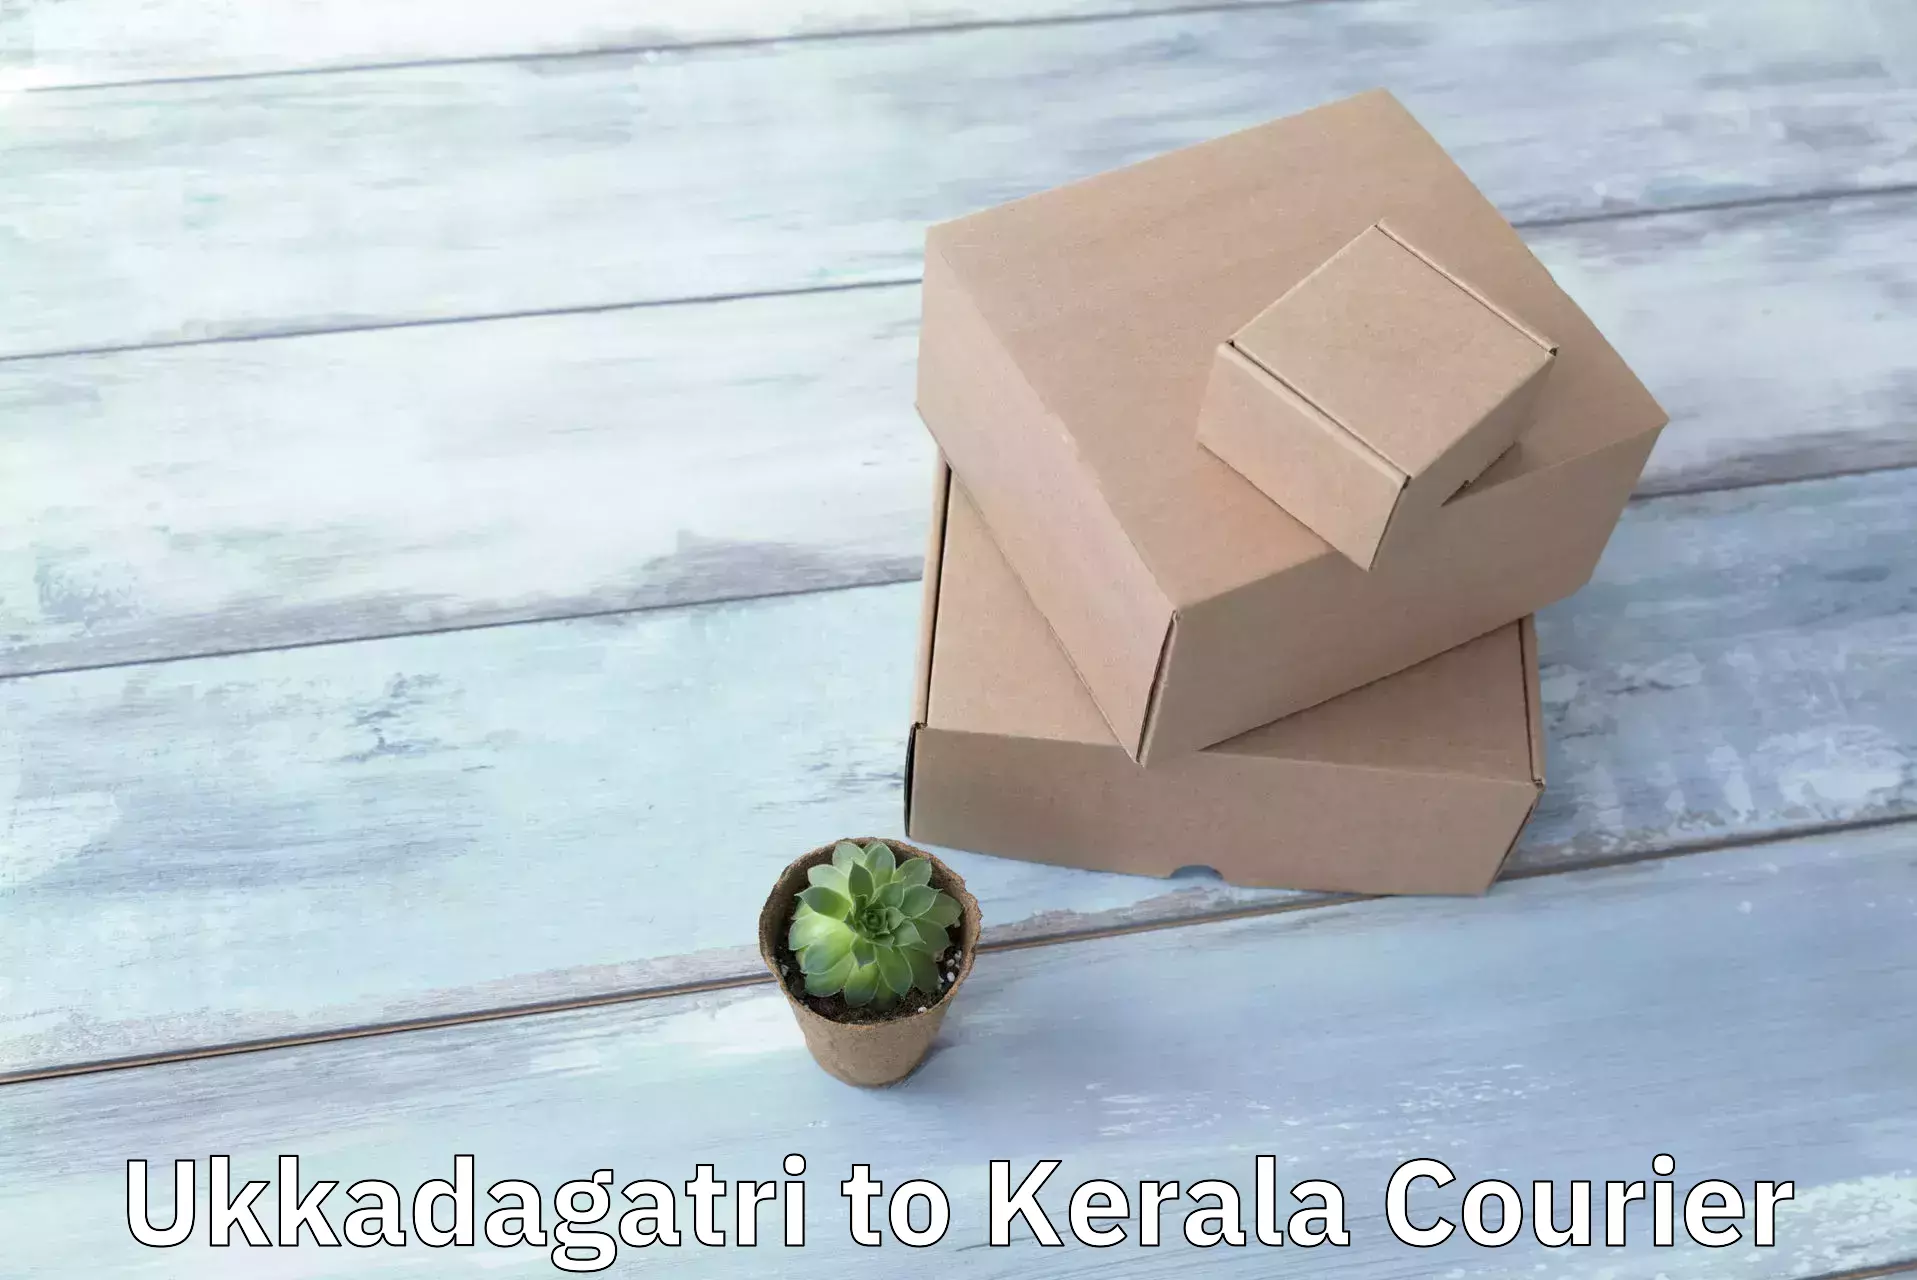 Round-the-clock parcel delivery Ukkadagatri to Angamaly